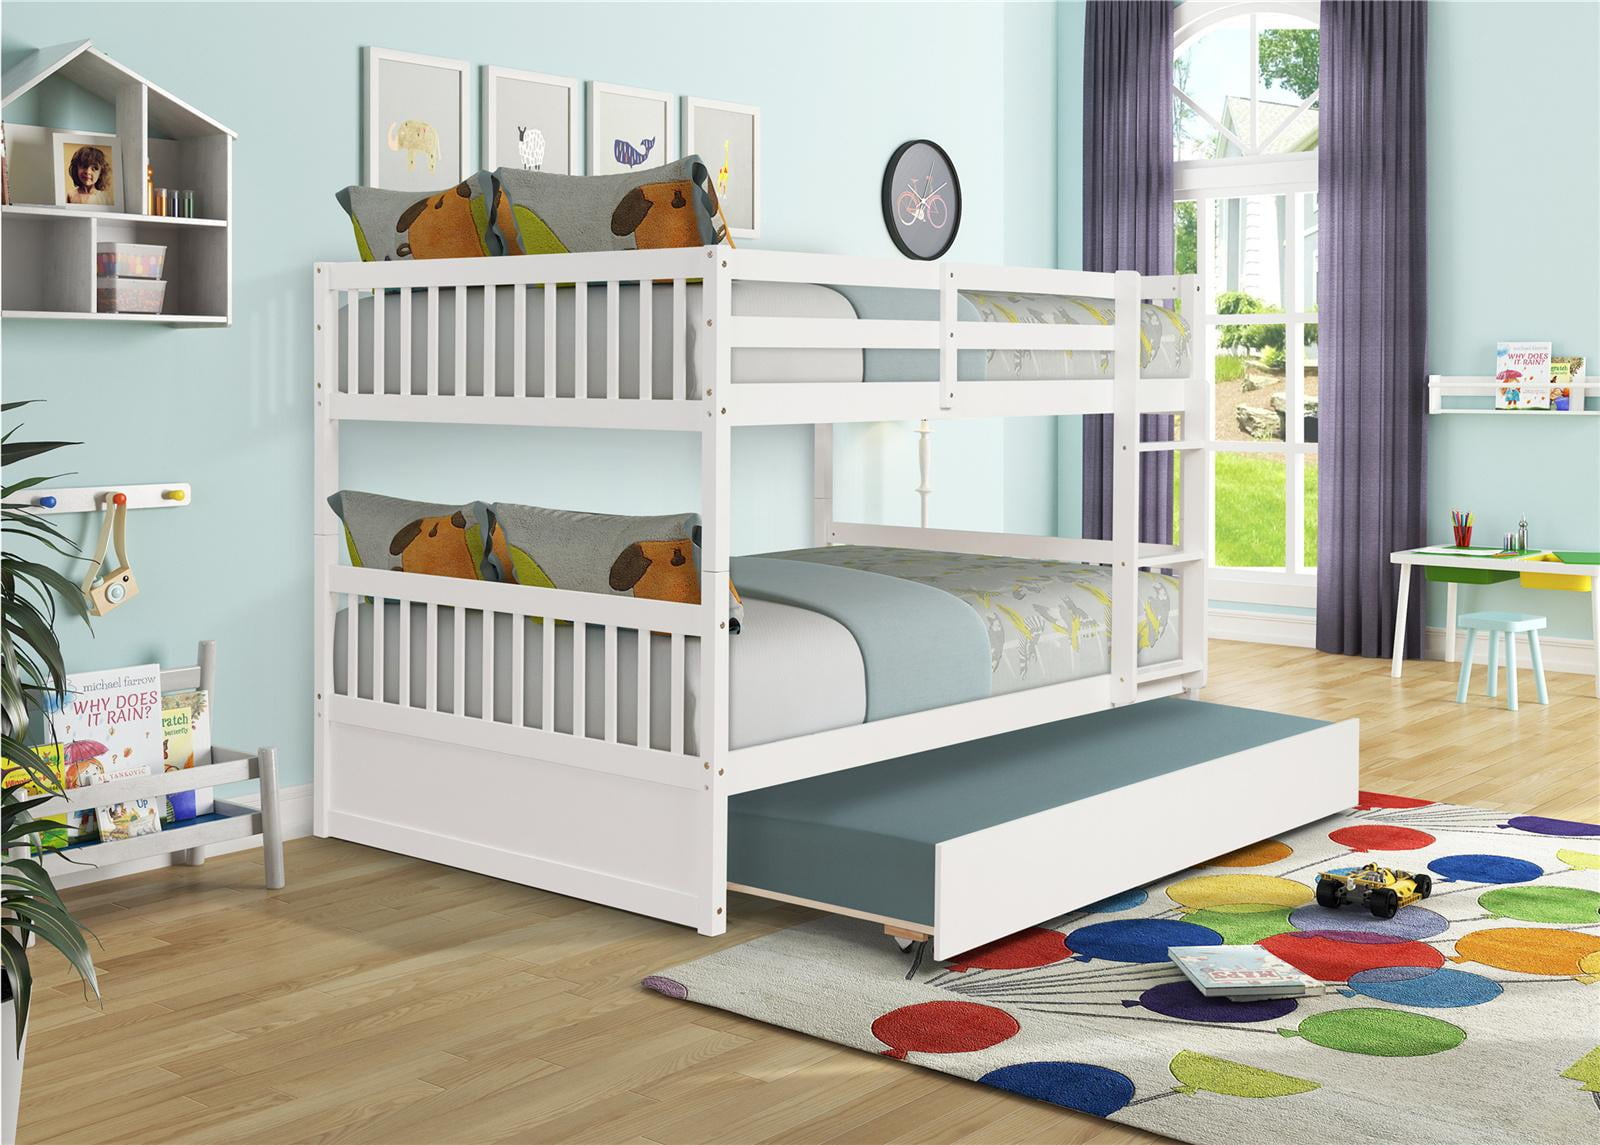 Full Bunk Bed With Trundle, White Detachable Bunk Beds